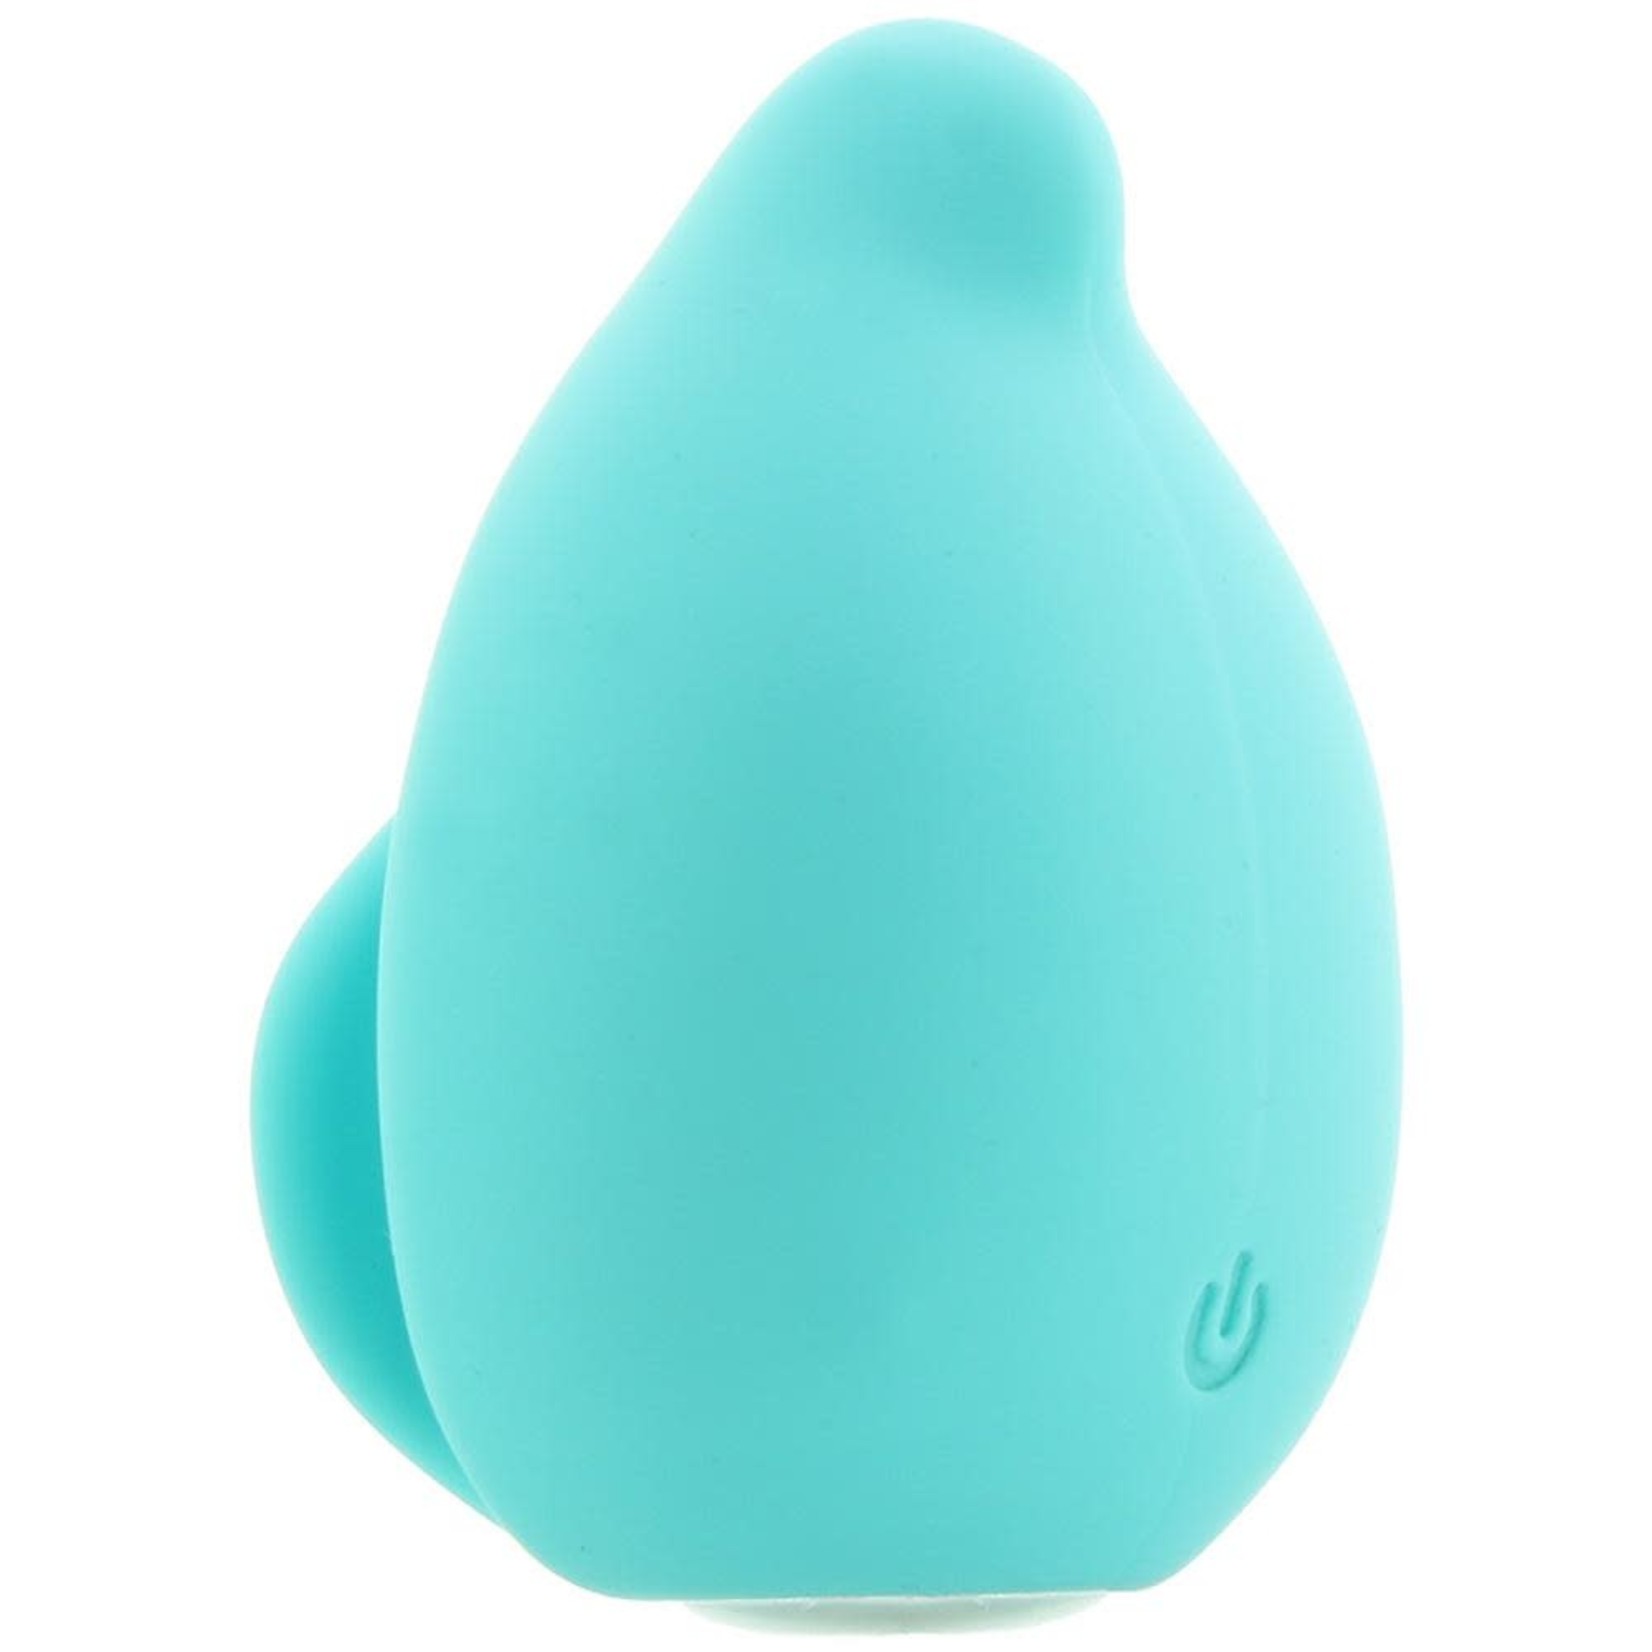 VEDO VEDO - YUMI RECHARGEABLE FINGER VIBE - TEASE ME TURQUOISE